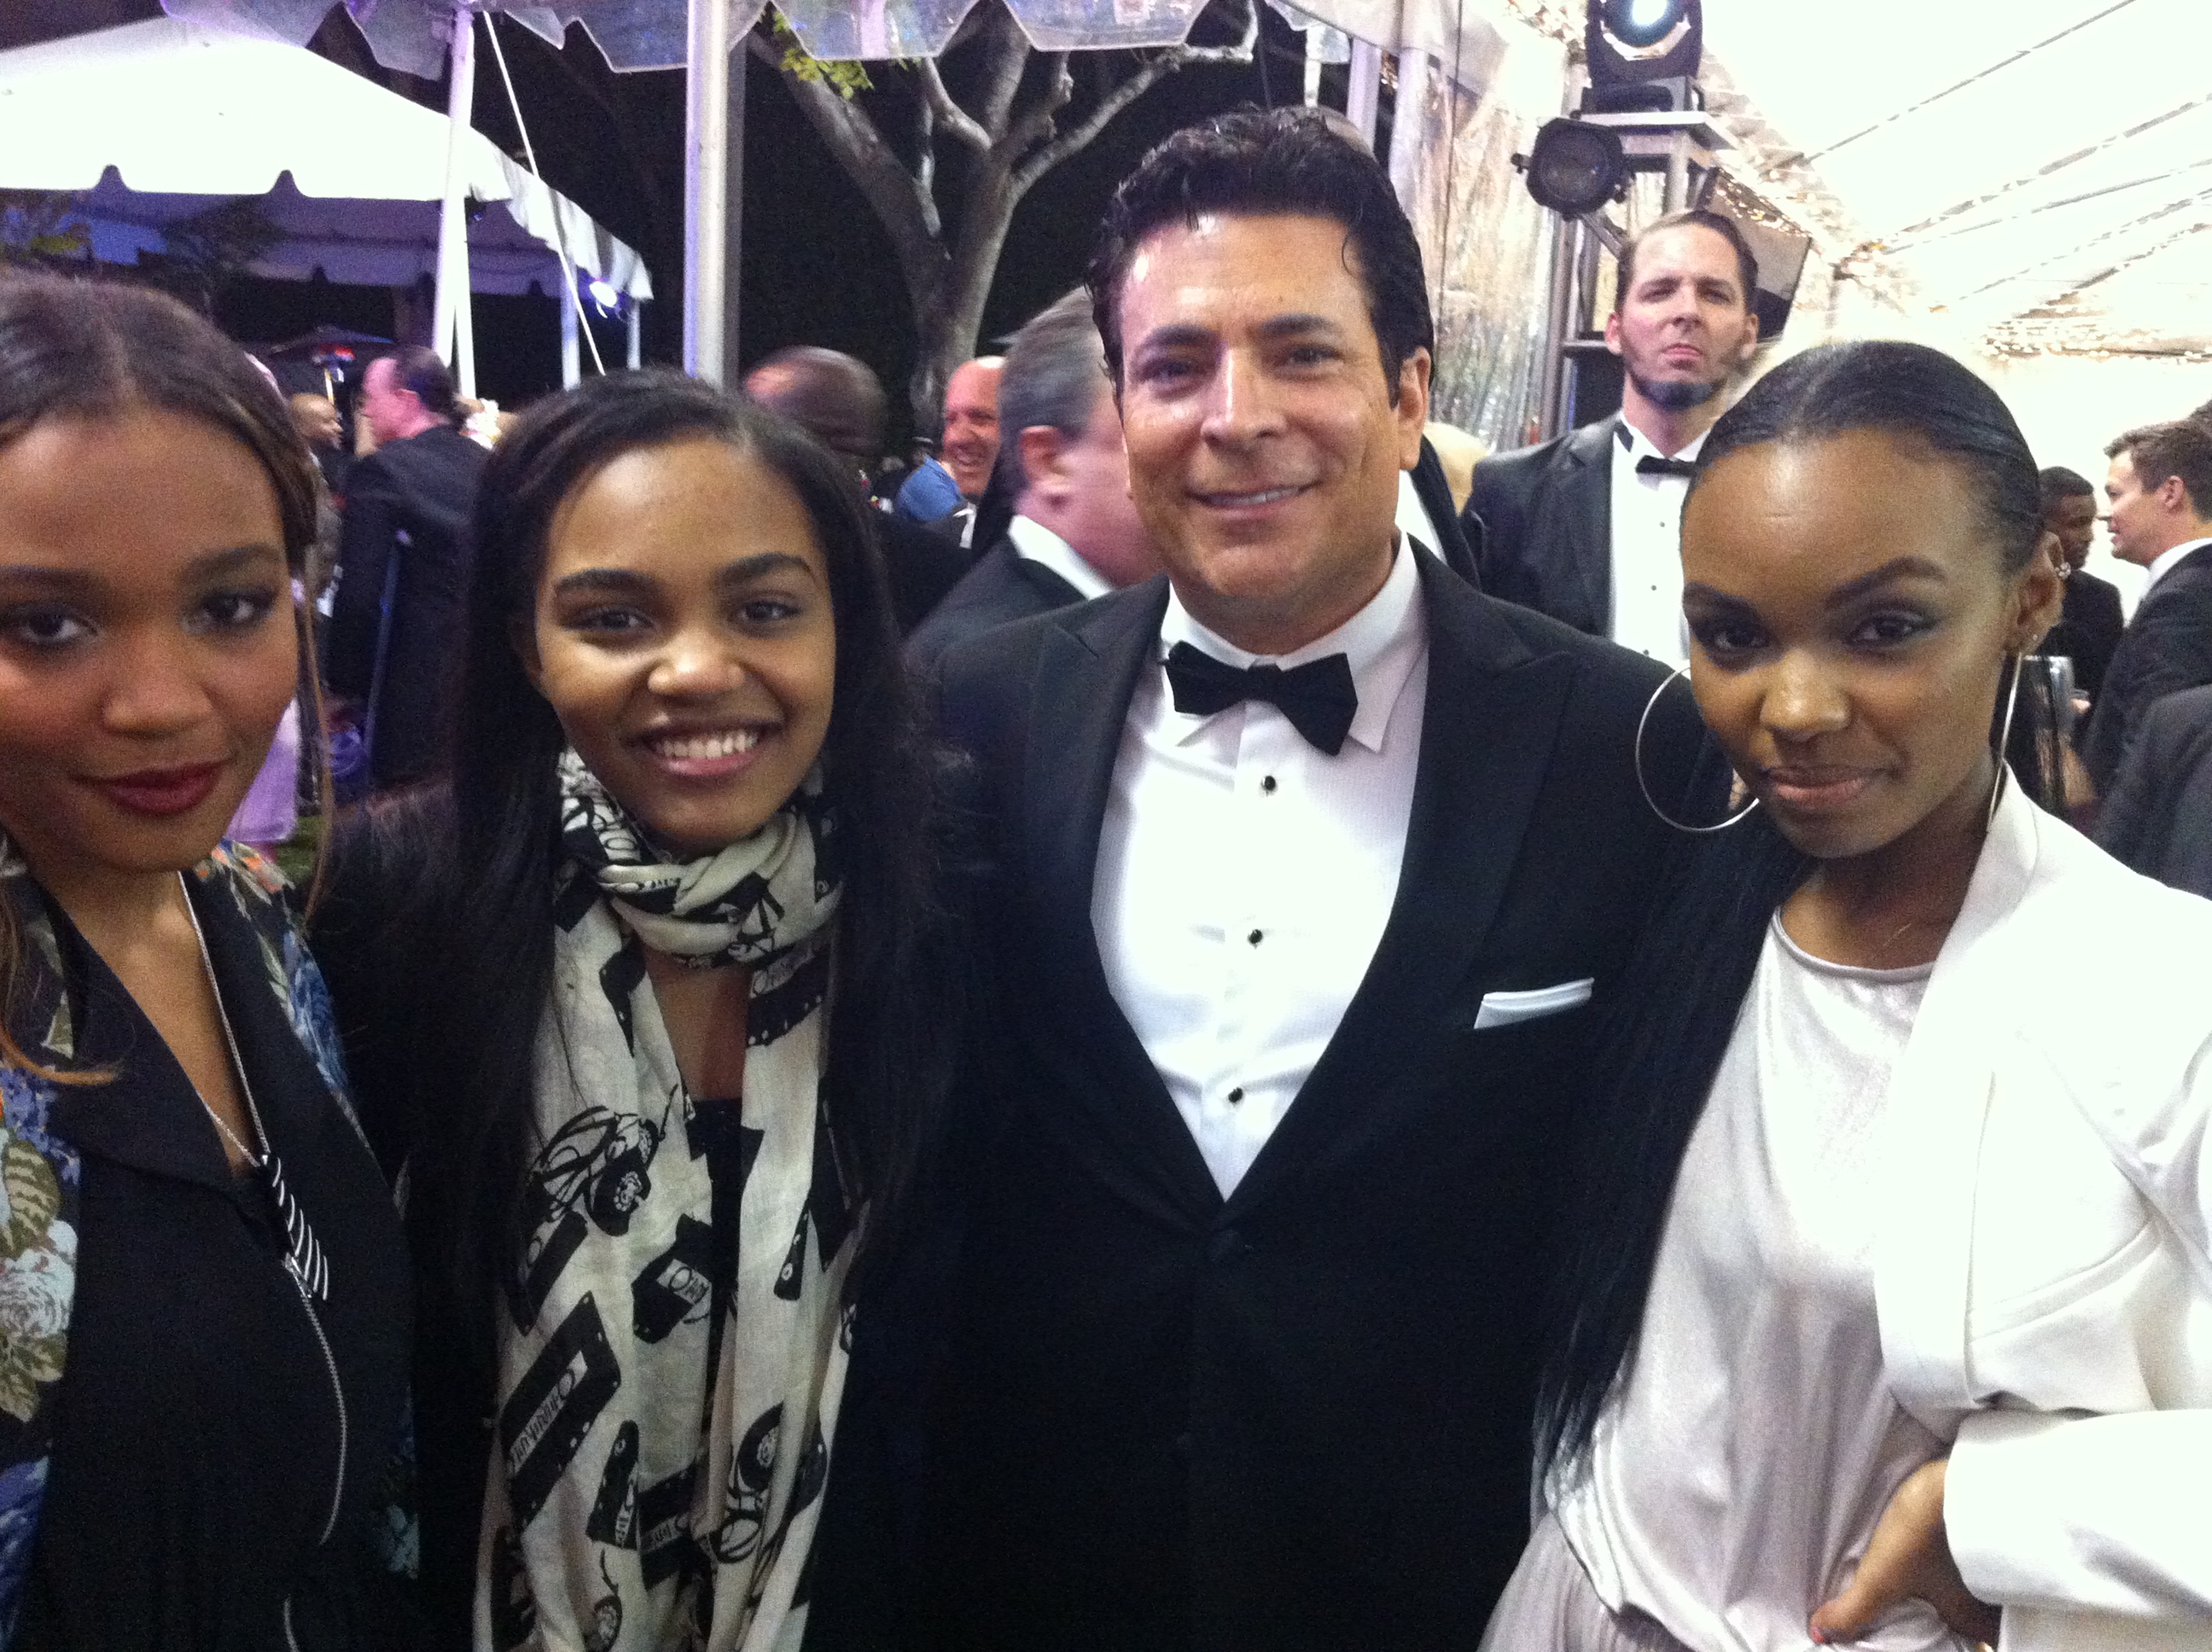 Writer/Director Daniel R. Chavez with actress China McCain of Disney's Ant Farm and her sisters Sierra and Lauryn at Oscars after party